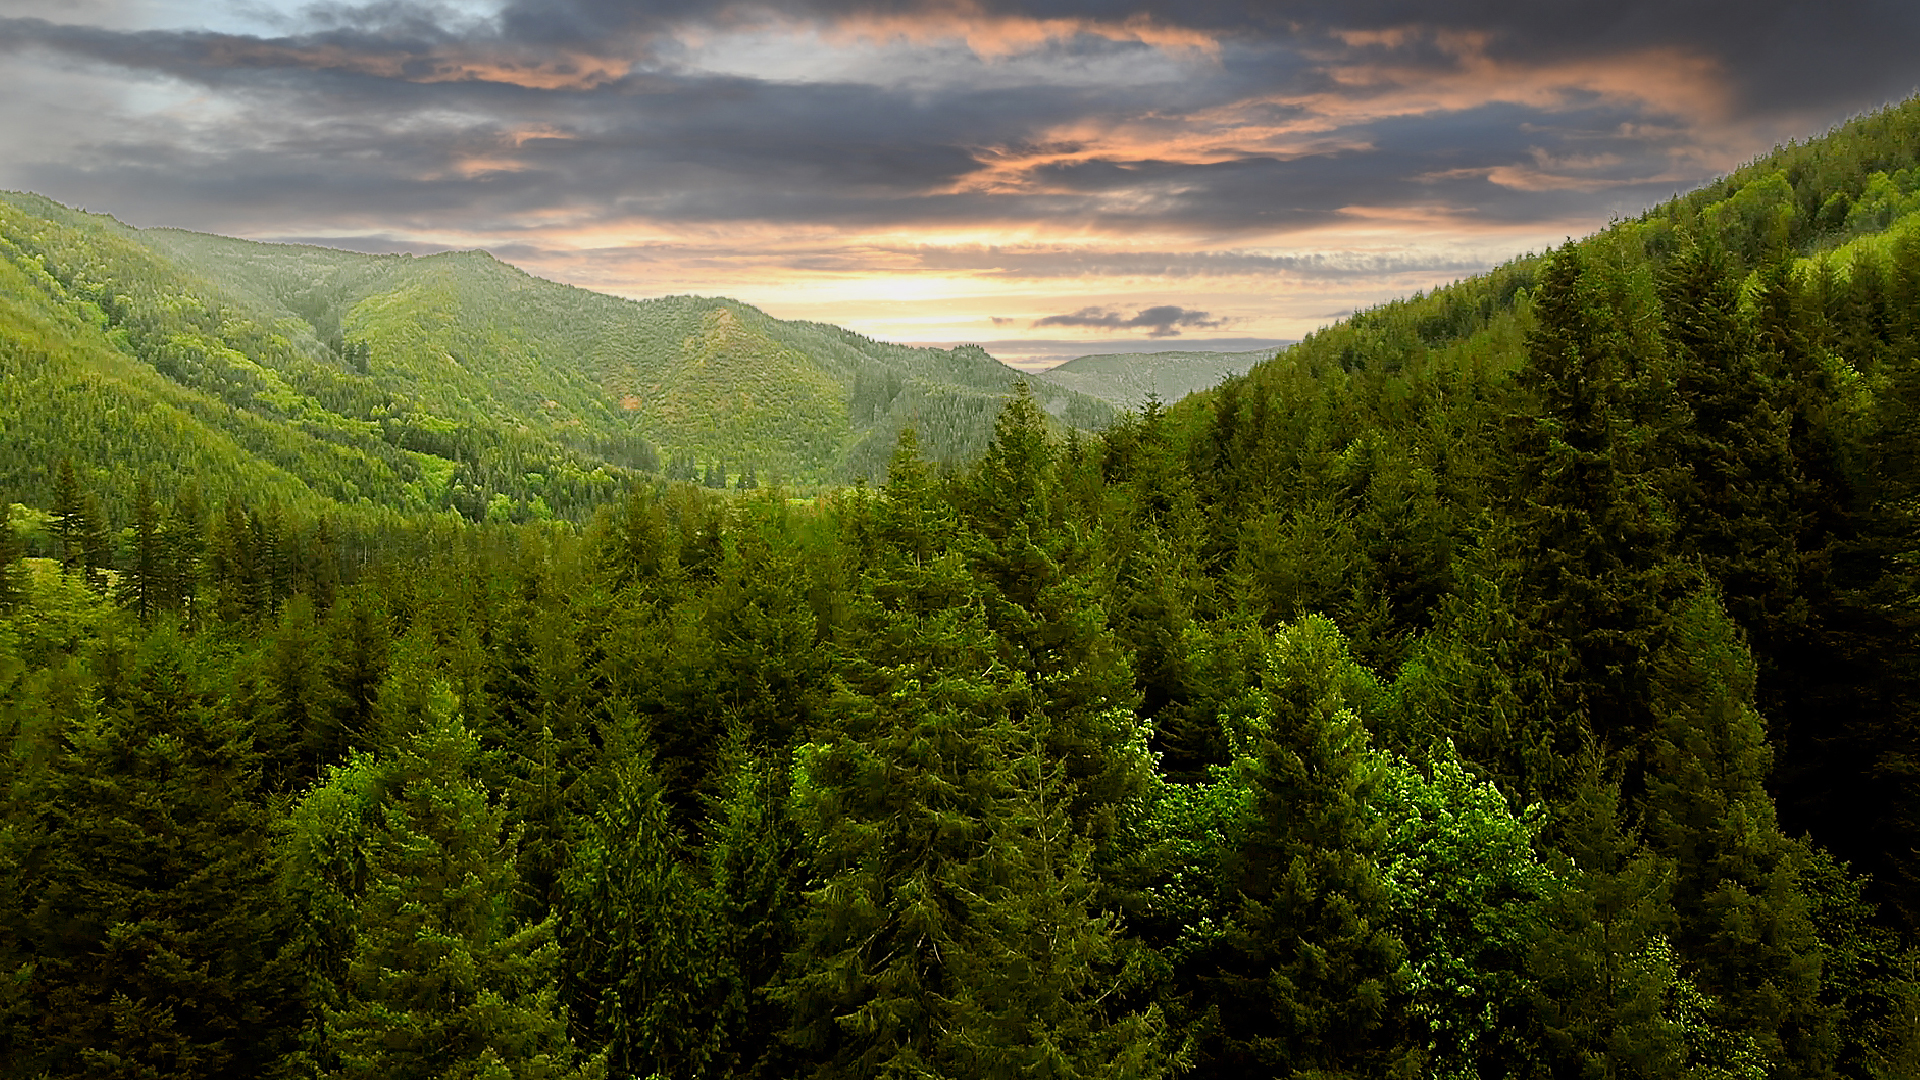 The Future of Washington’s Forests